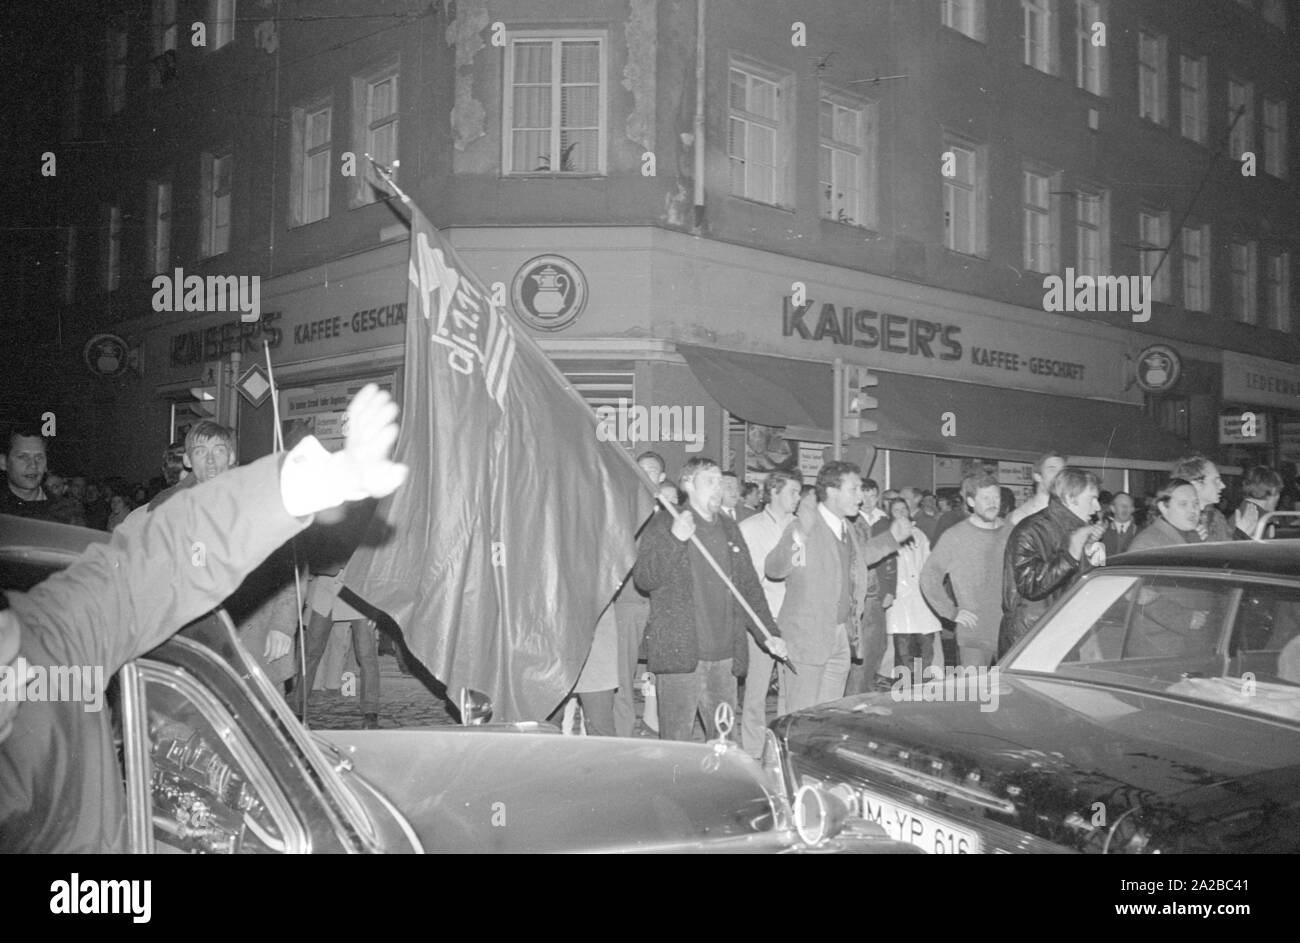 After the assassination attempt on Rudi Dutschke, actions took place against the Springer publishing house throughout Germany on the Easter weekend 1968. In Munich, demonstrators try to stop the delivery of the Bild-Zeitung through the barricade of the Munich bookshop on Schellingstrasse (either 12.04 or 15.04.). Pictured: Demonstrators of the 'Deutsche Jungenschaft vom 1.11.1929' Stock Photo